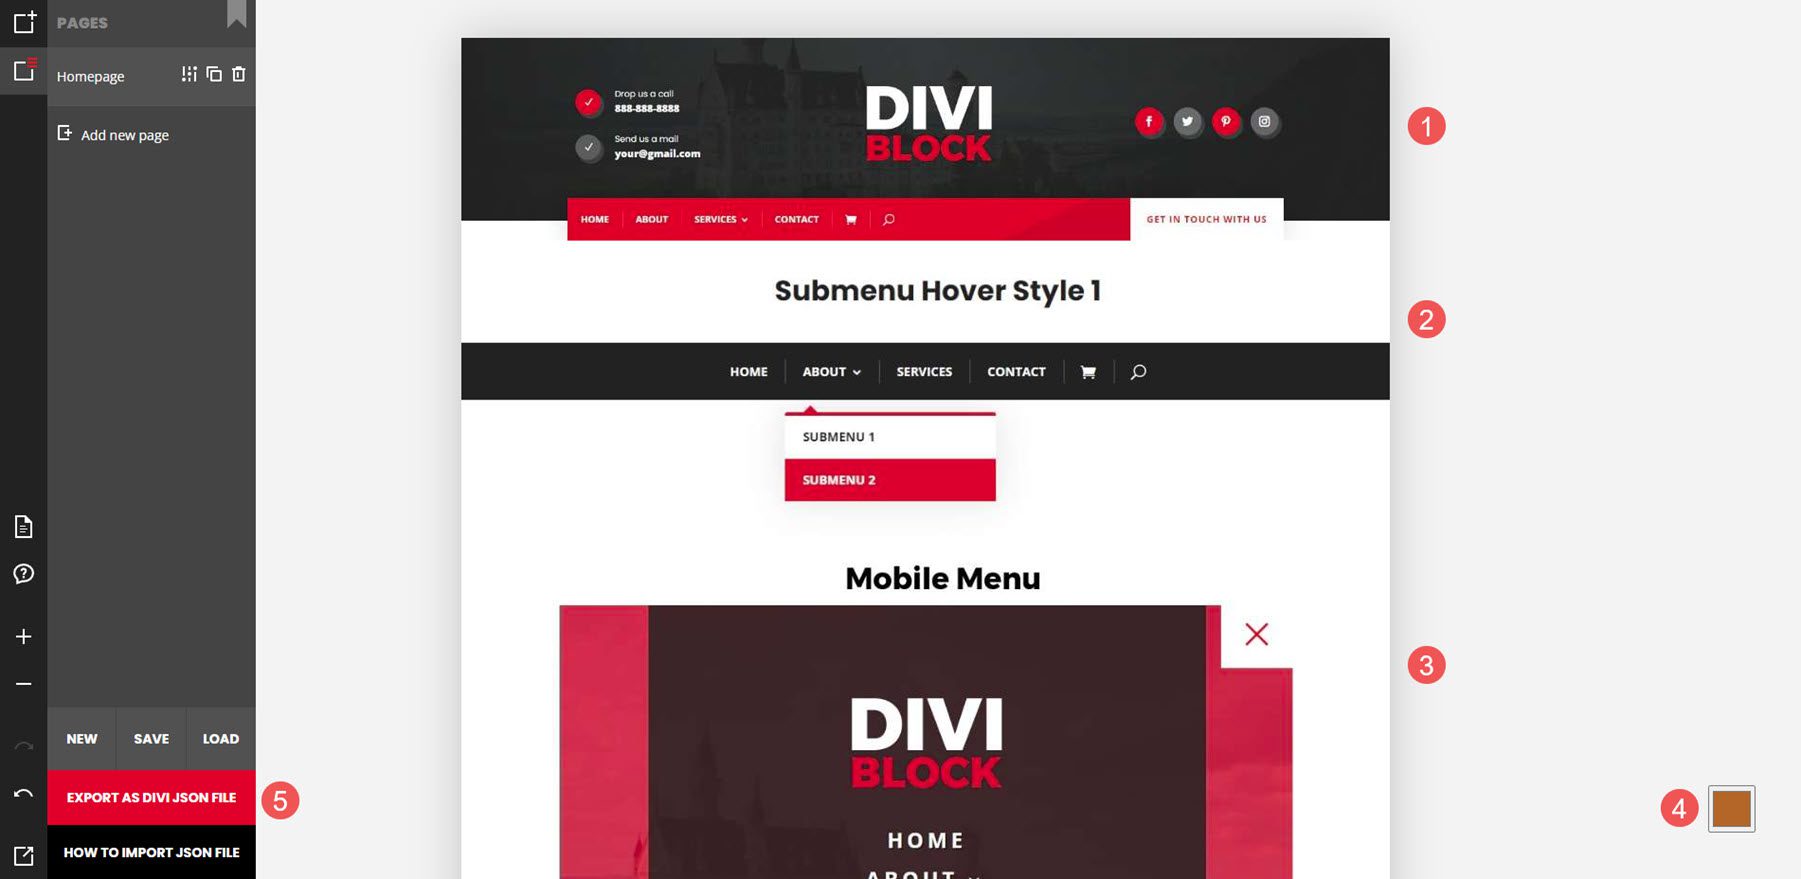 Designing a Layout with Divi Block